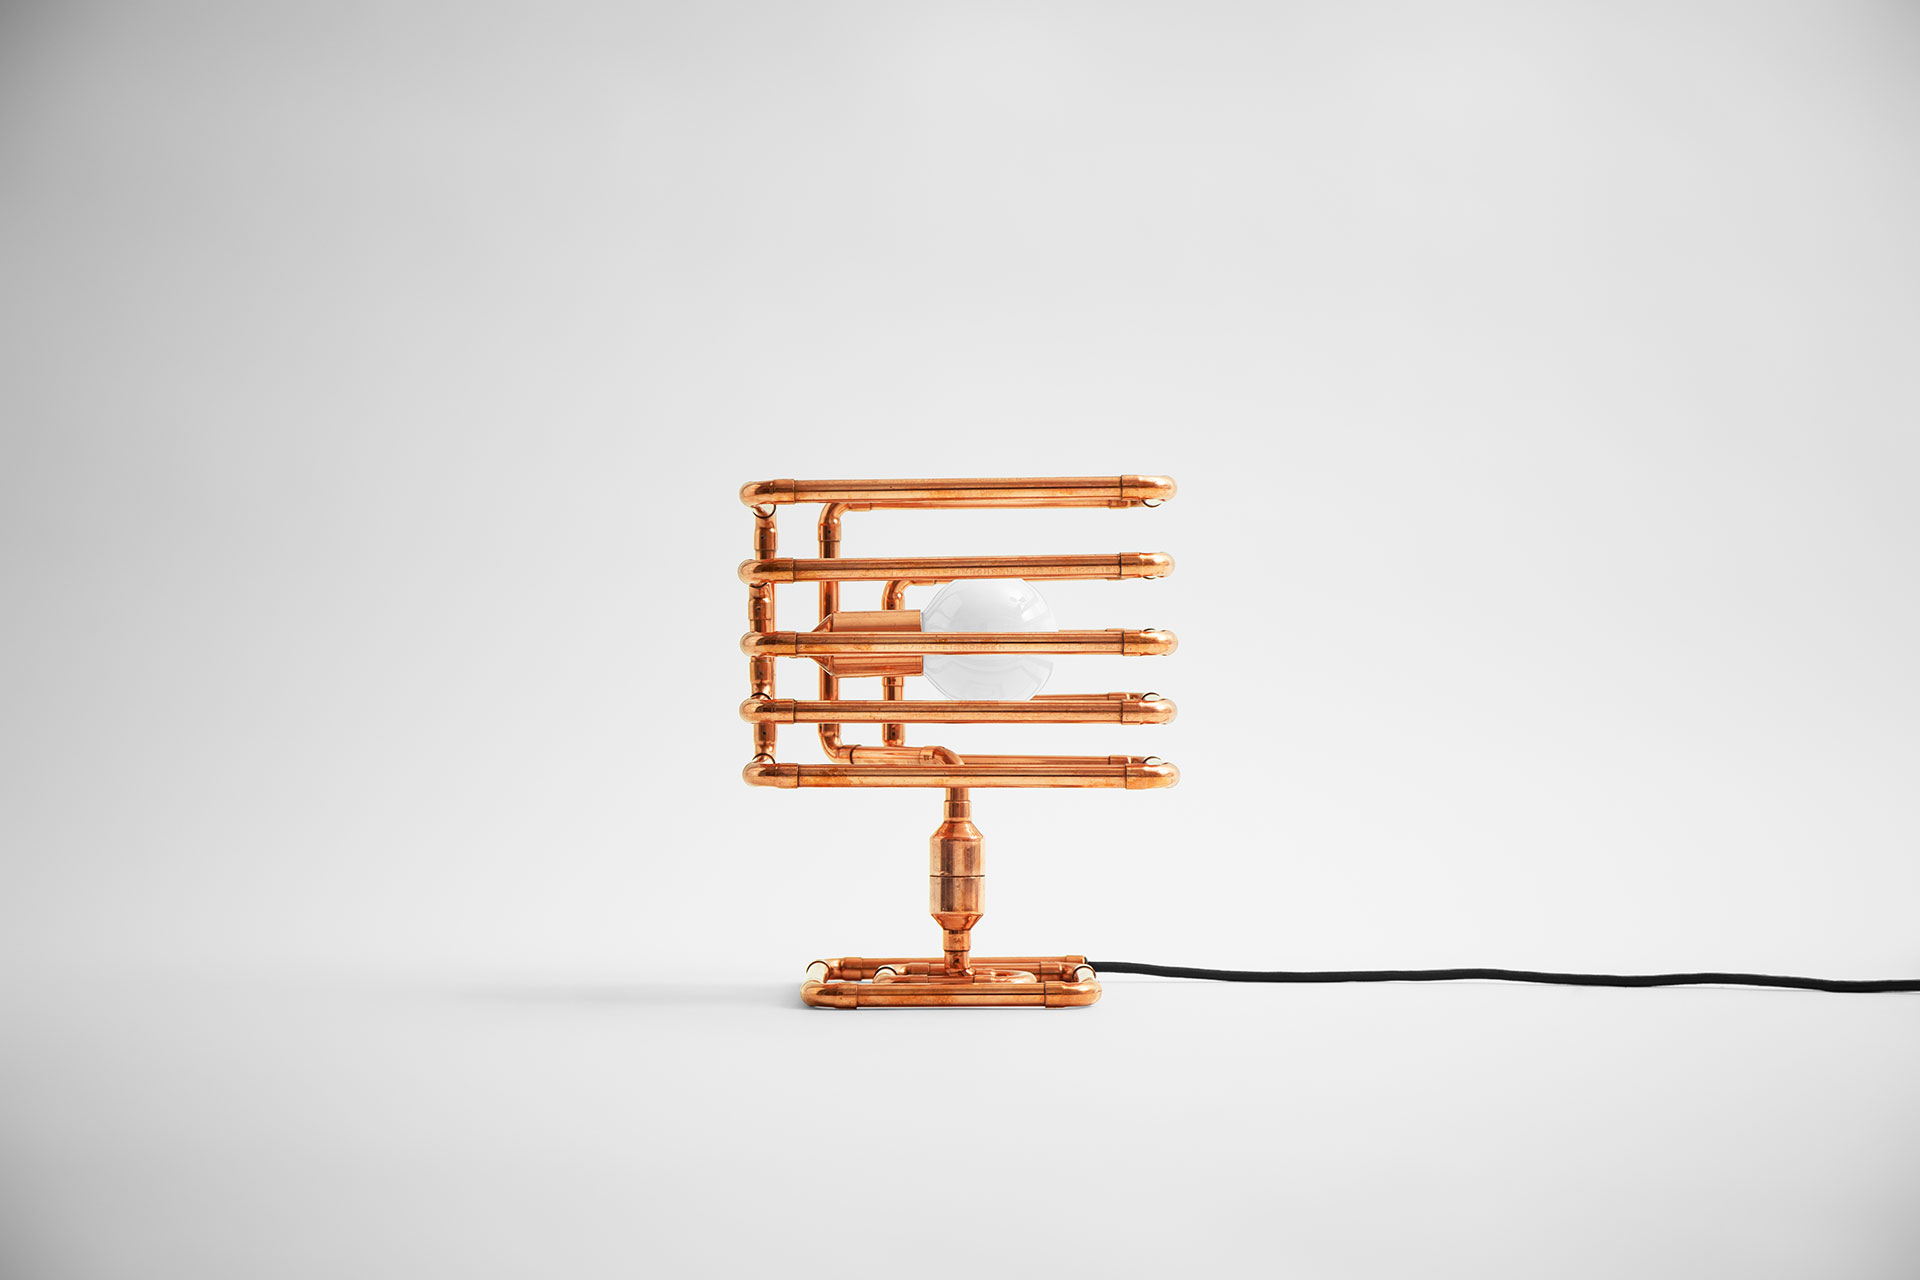 Unusual table lamp in trendy copper metal finish inspired by industrial design